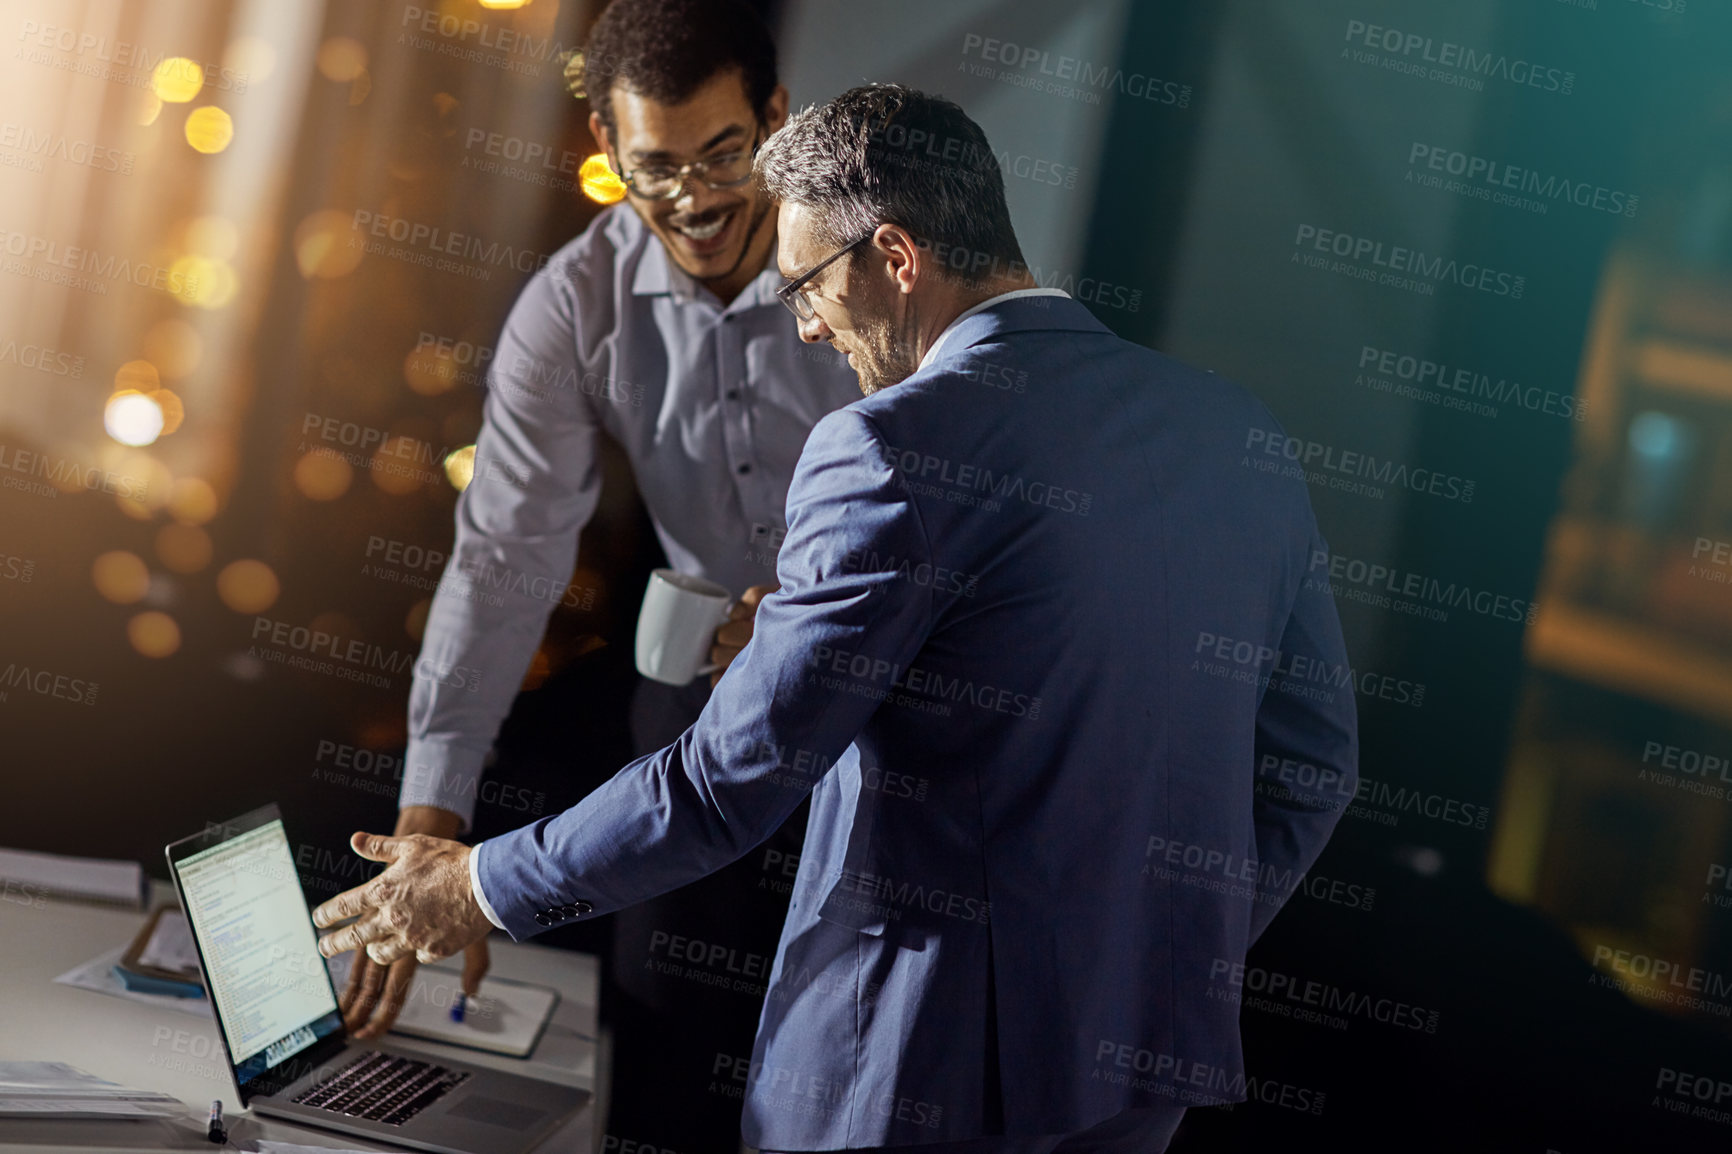 Buy stock photo Shot of a coworkers using a laptop together while woking late at the office